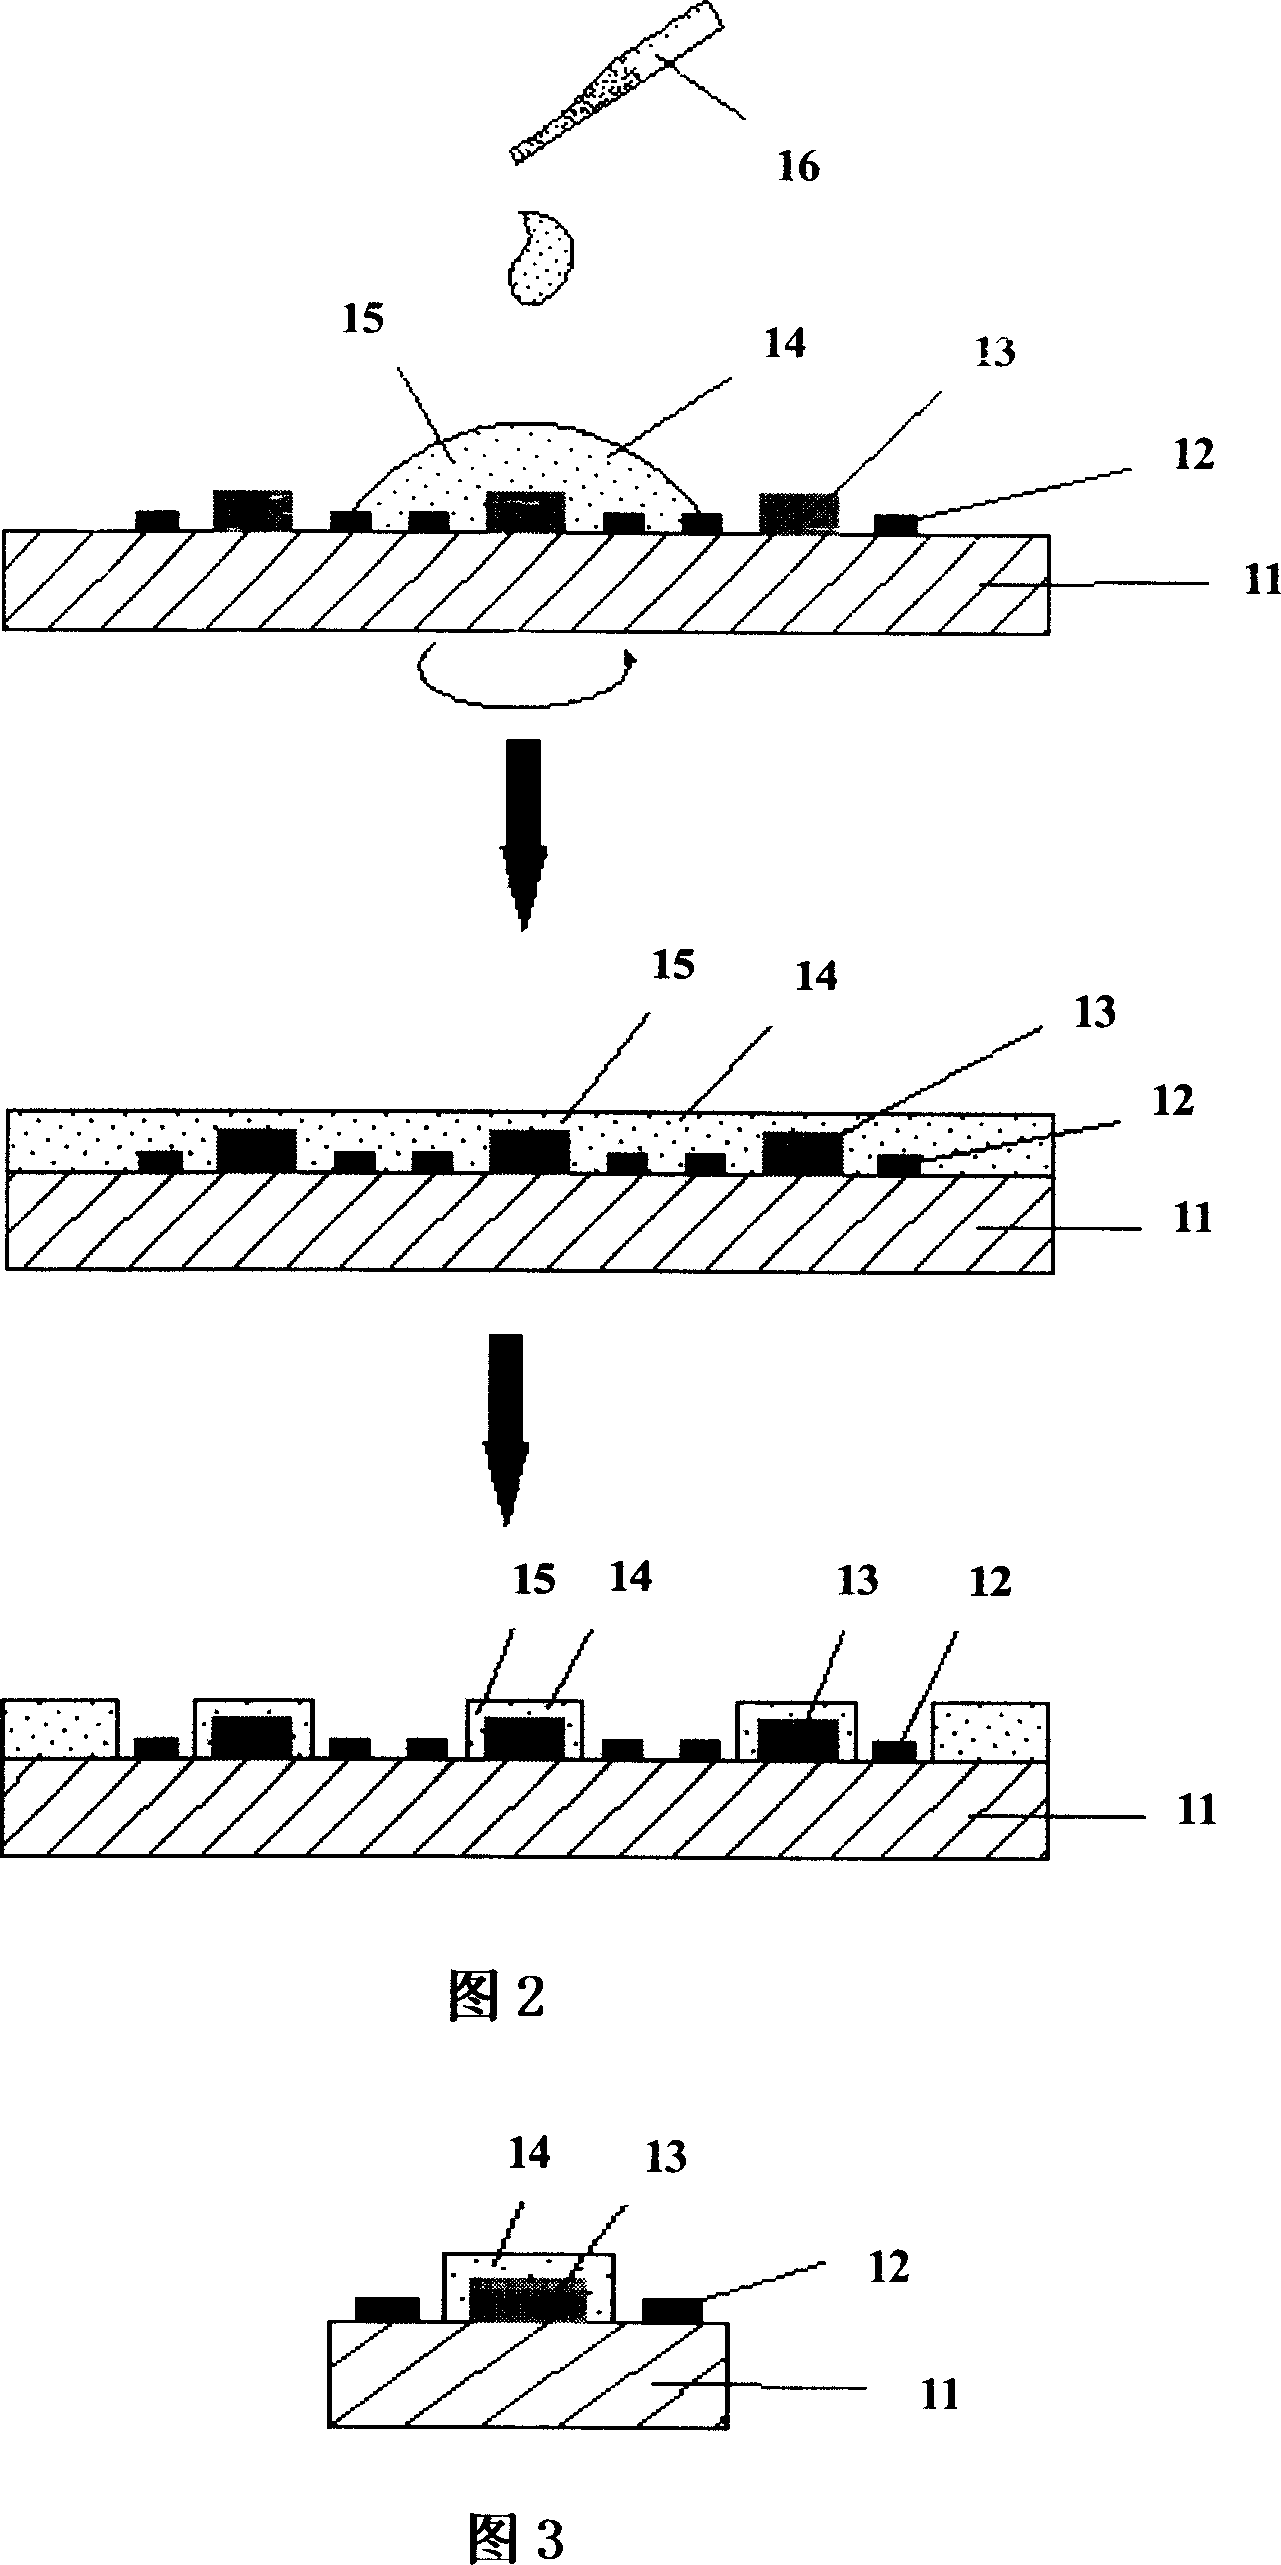 Method for encapsulating LED with rotary glue and optical etching technology